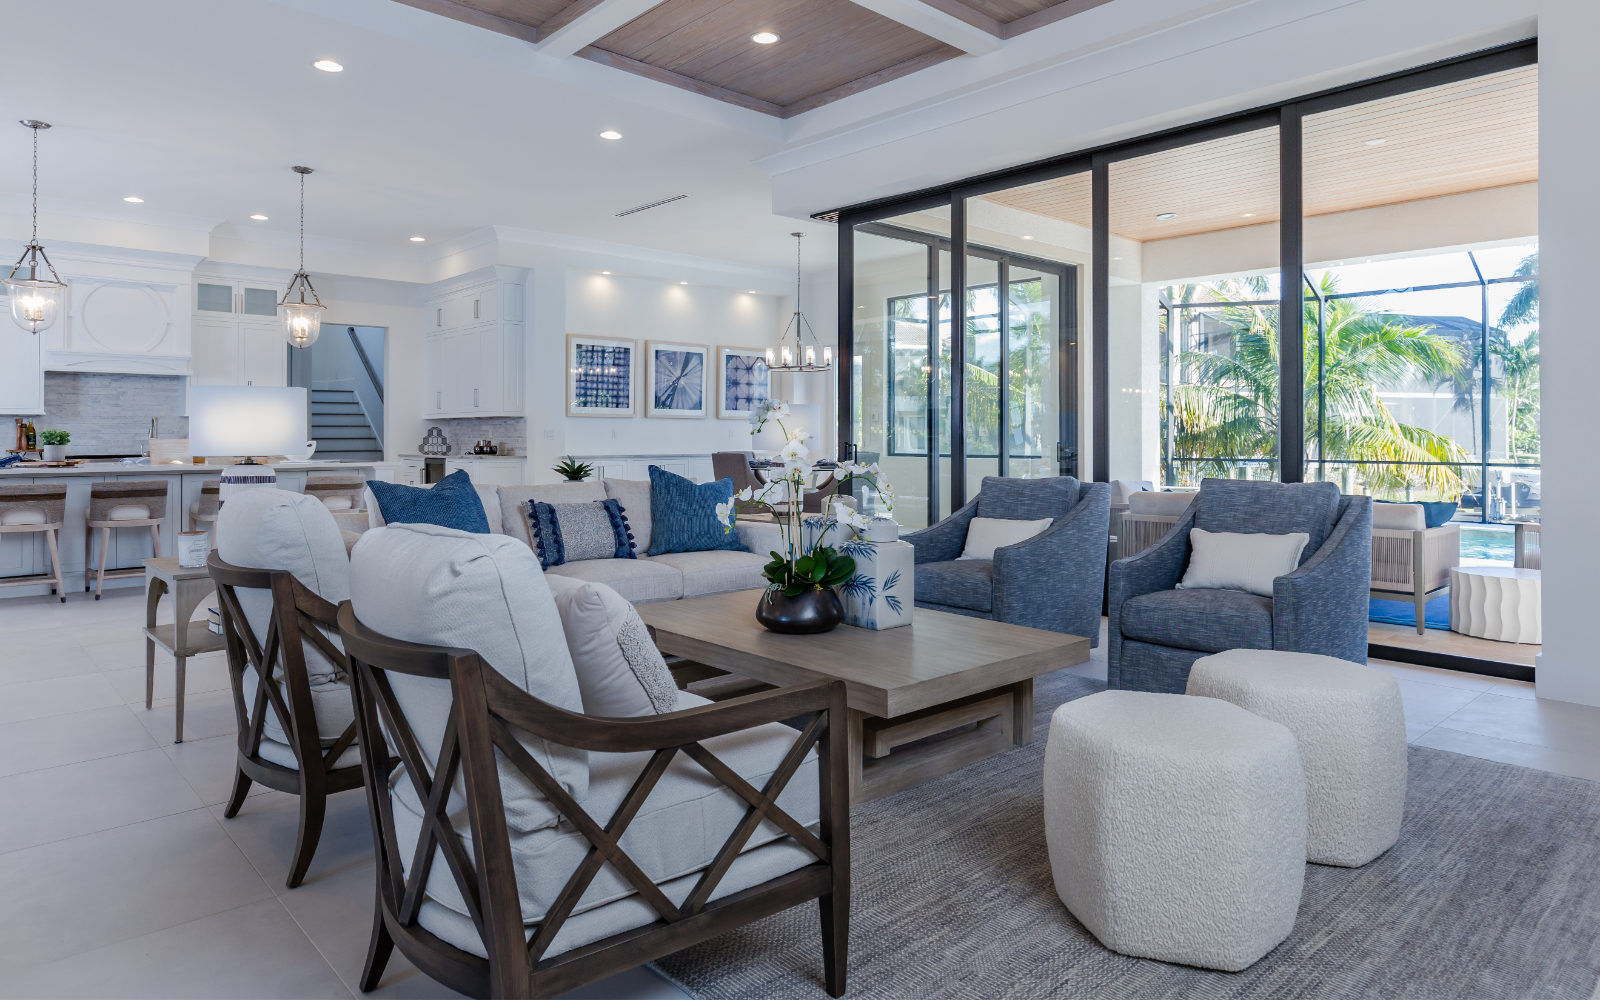 Clive Daniel Home installs furniture in luxury Frey and Son model waterfront Cape Harbour Home